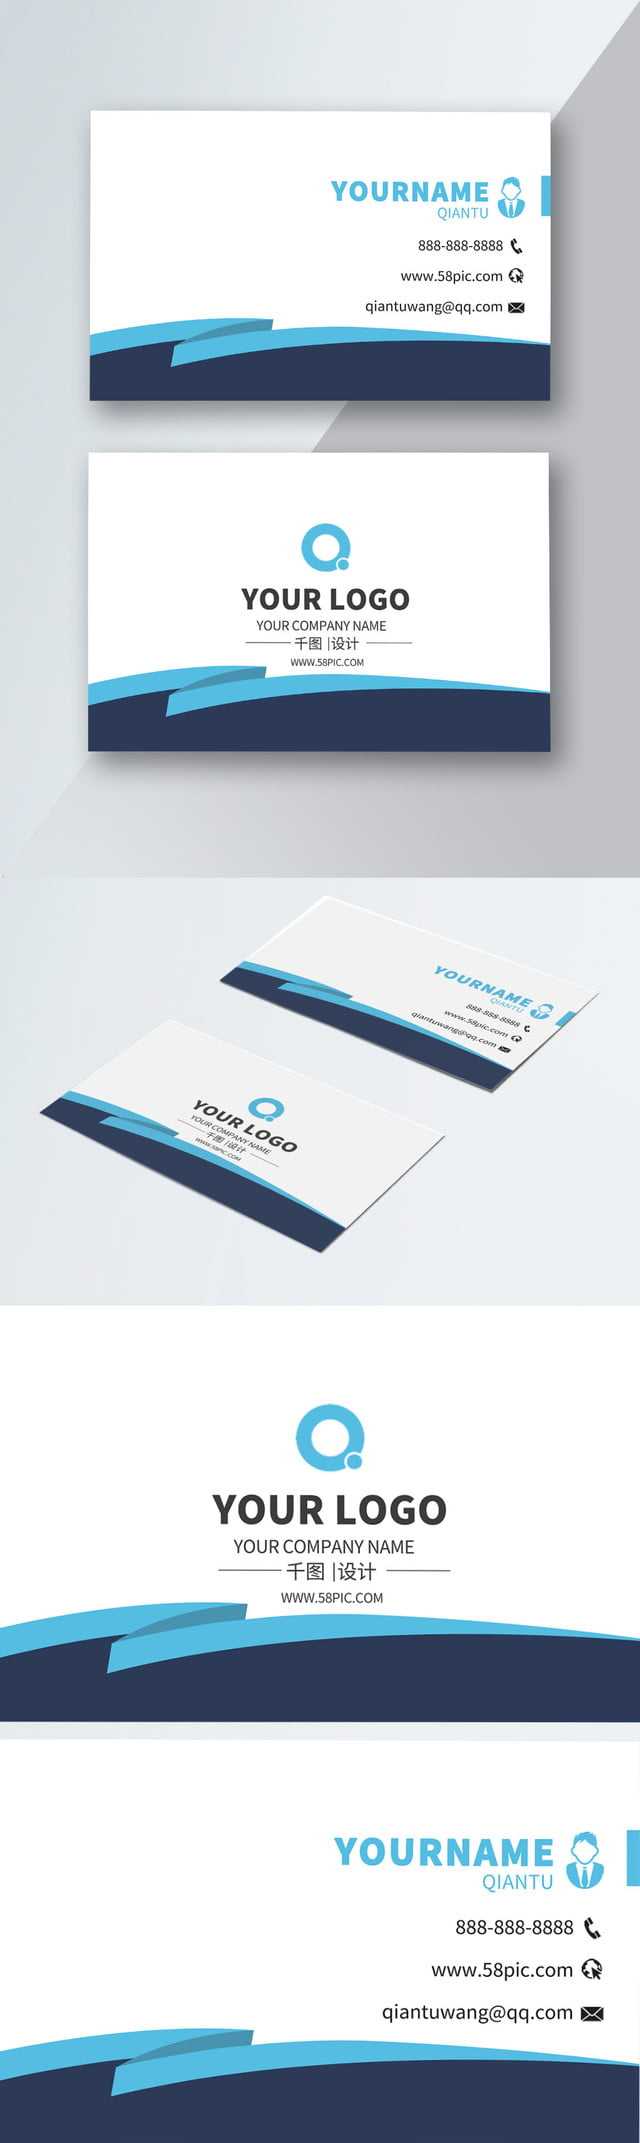 Advertising Company Business Card Material Download With Company Business Cards Templates